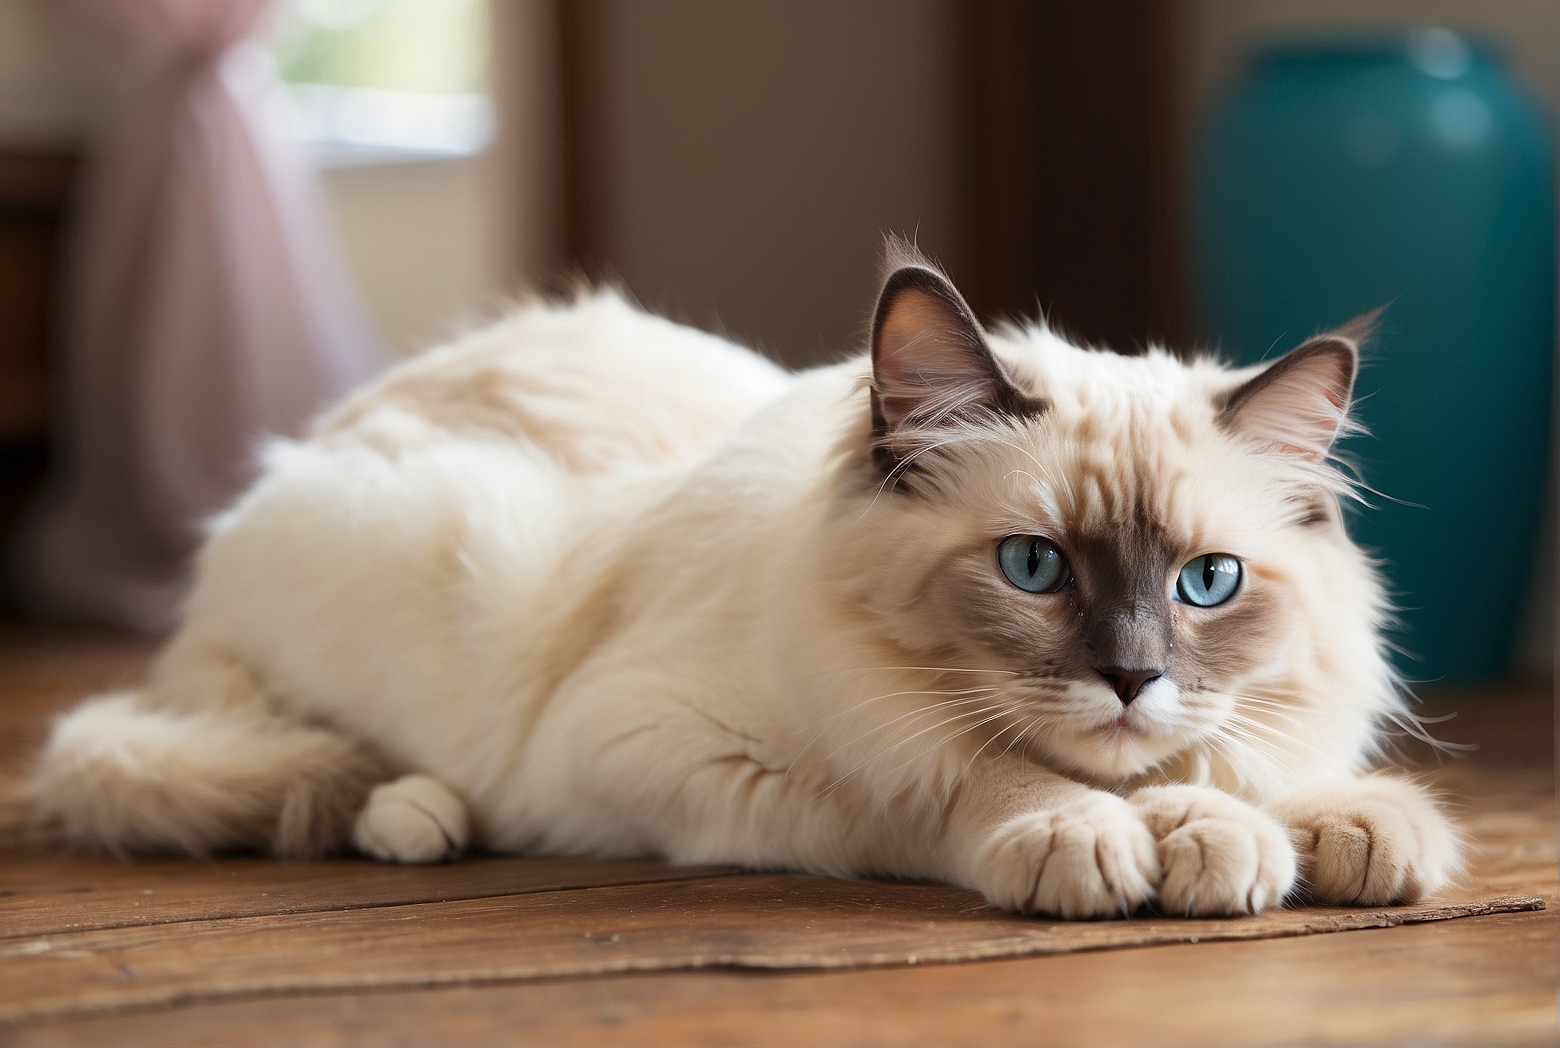 How Does the Growth of Ragdoll Cats Progress?